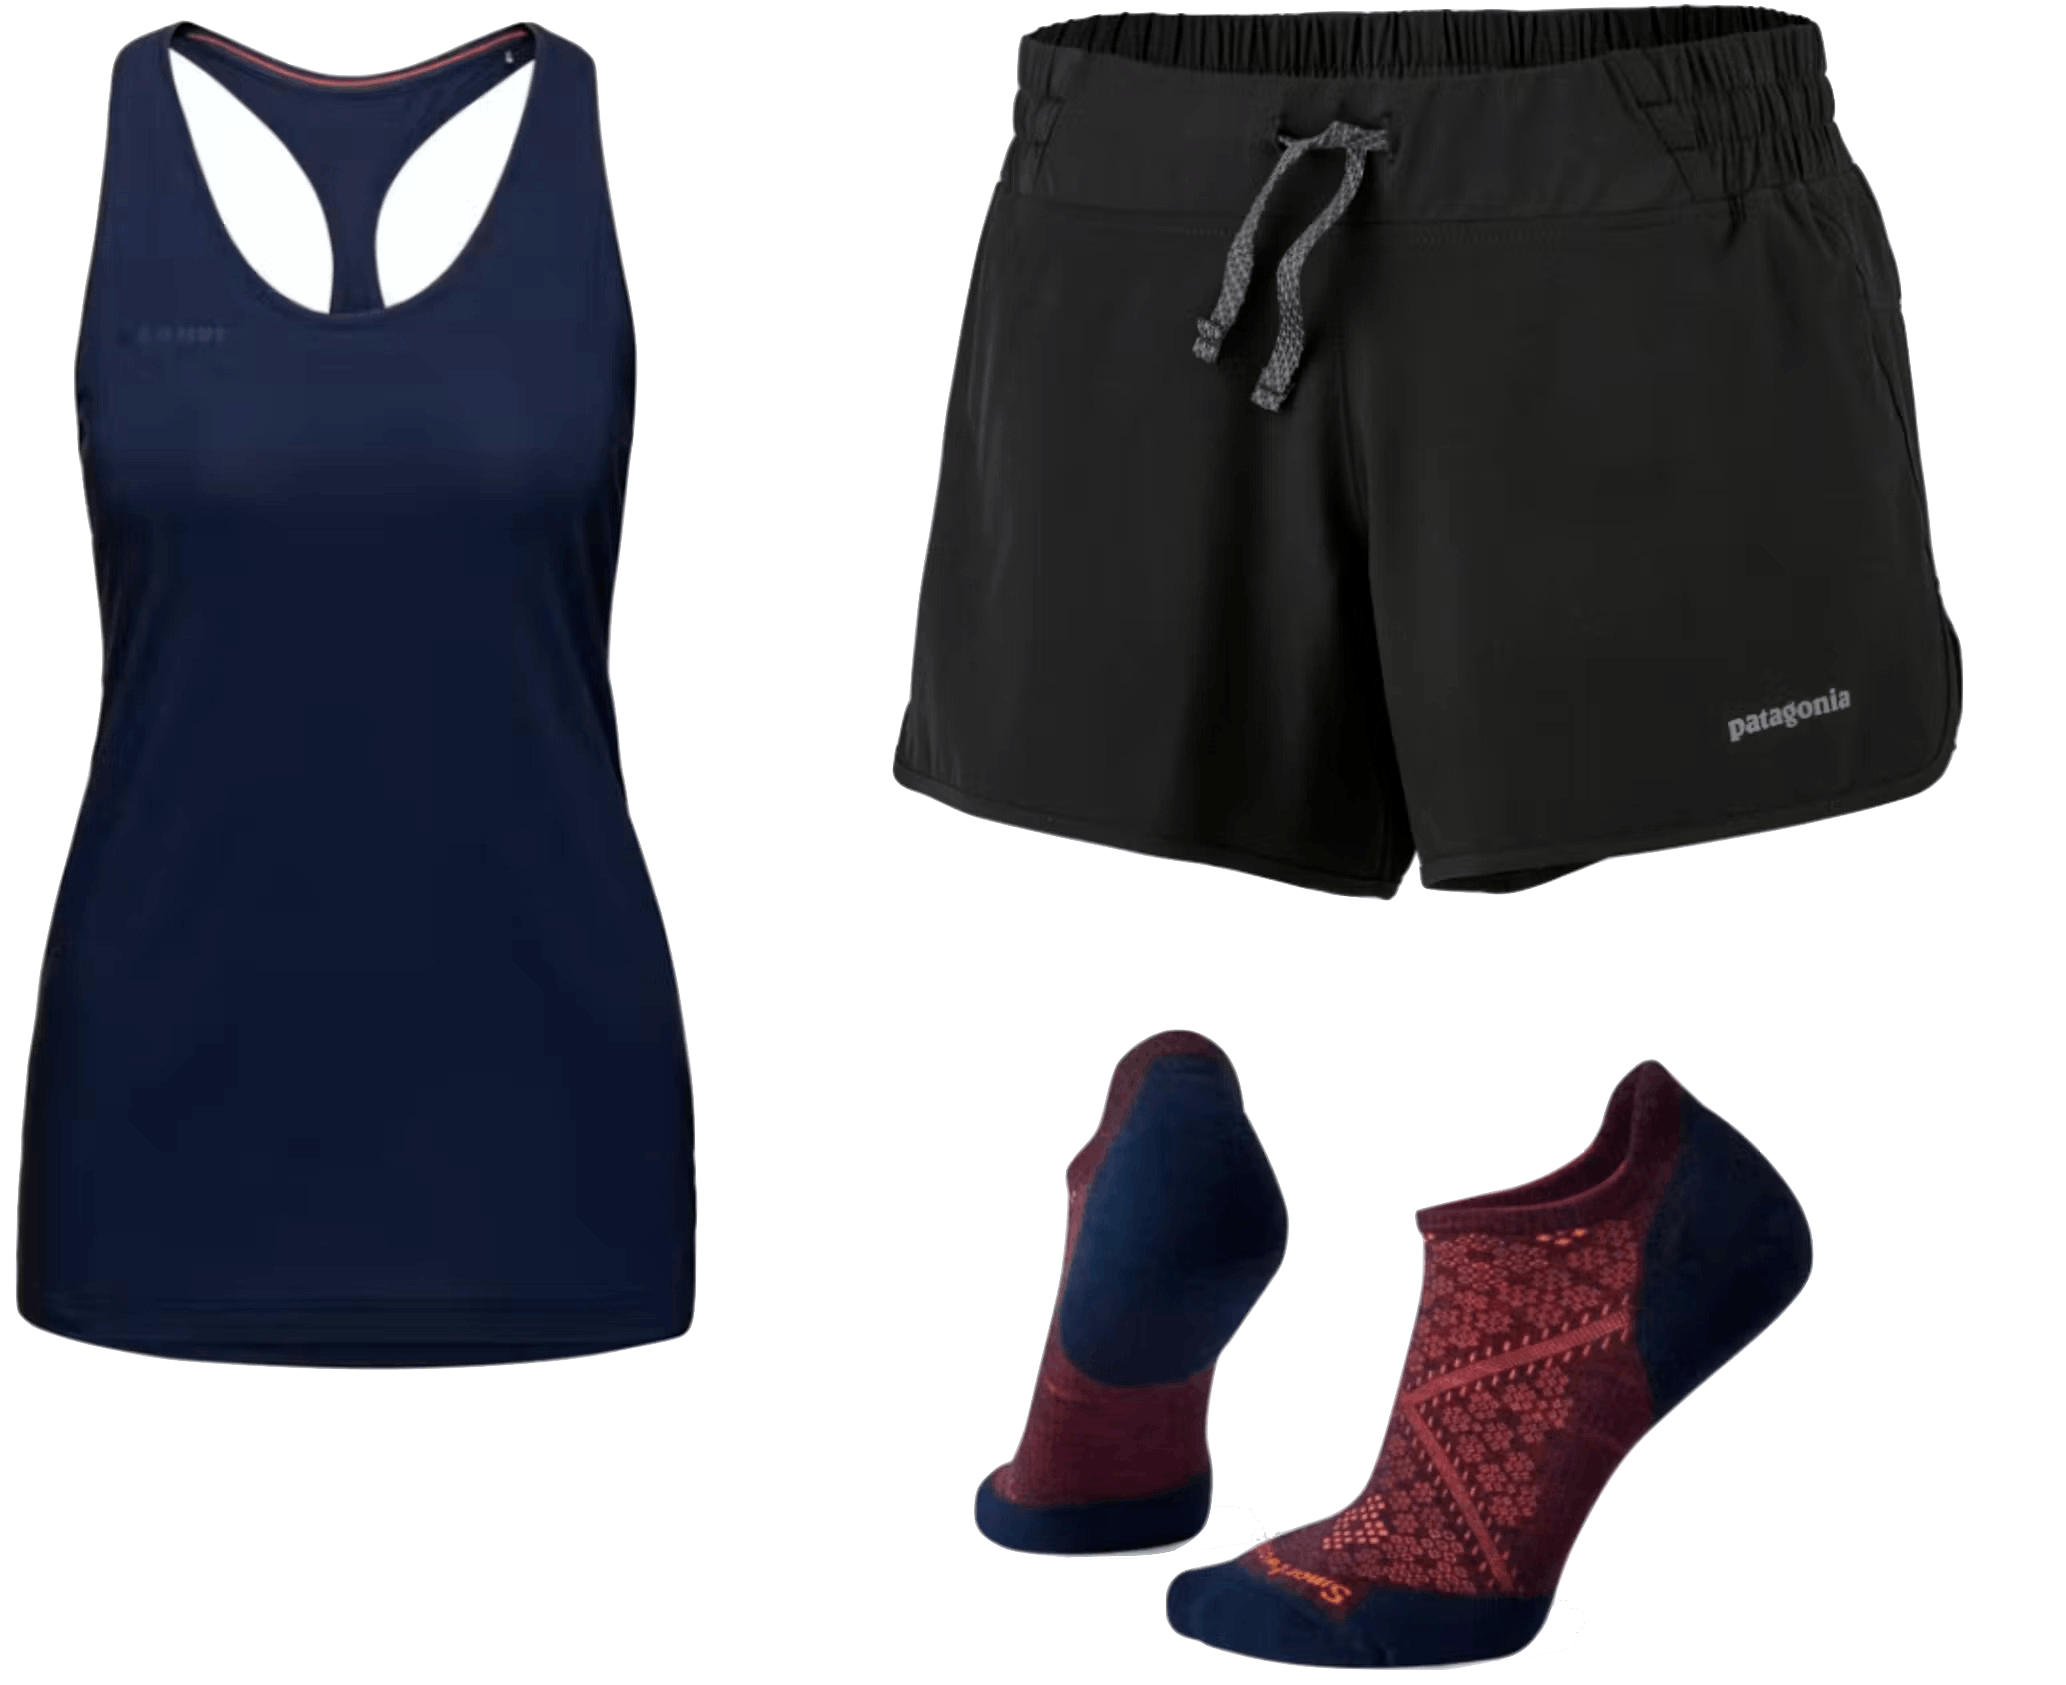 The Mammut Camie Tank (left), the Patagonia Strider shorts (top right), and the Smartwool PhD light sock (bottom right)